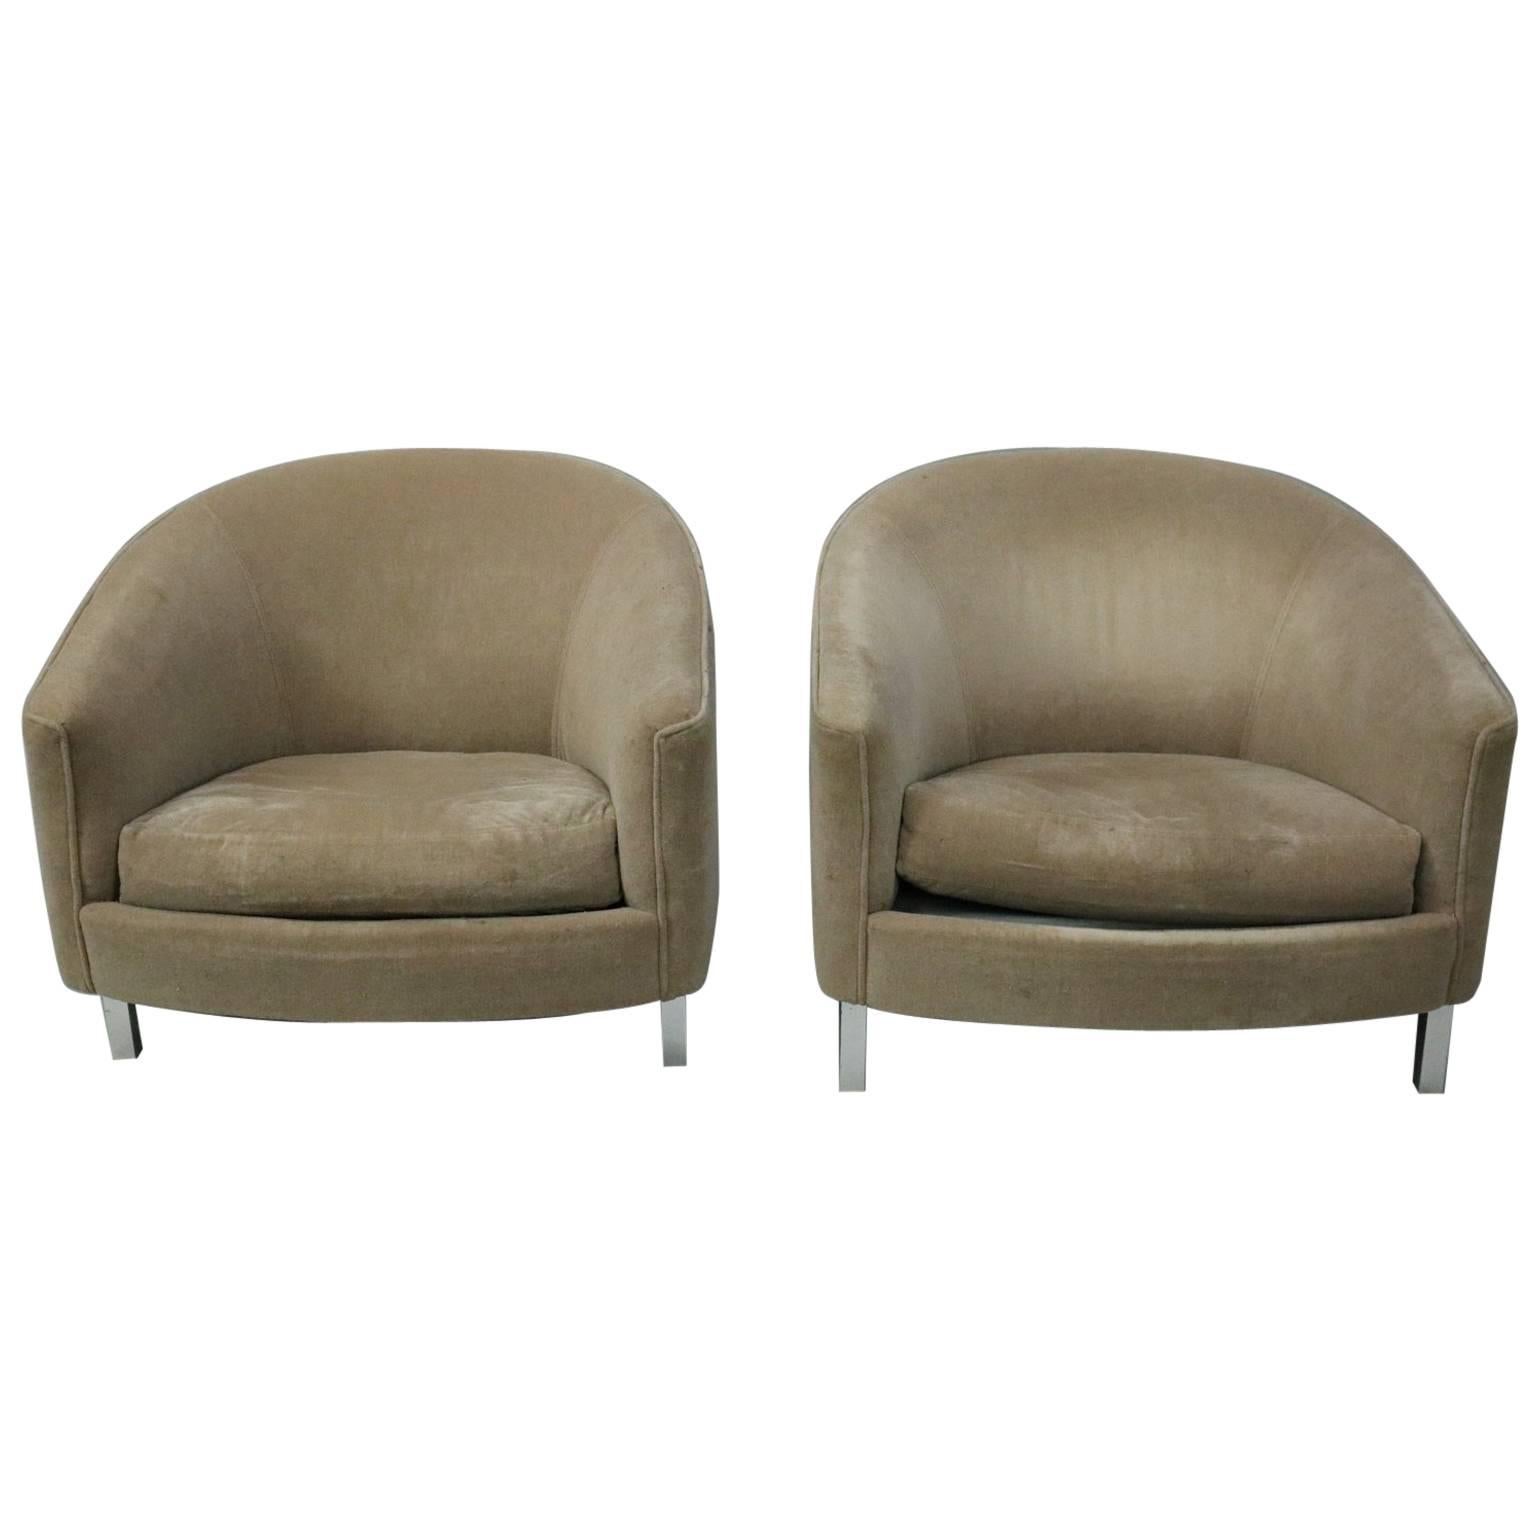 Pair of Mid-Century Modern Upholstered Club Chairs on Chrome Legs, 20th Century